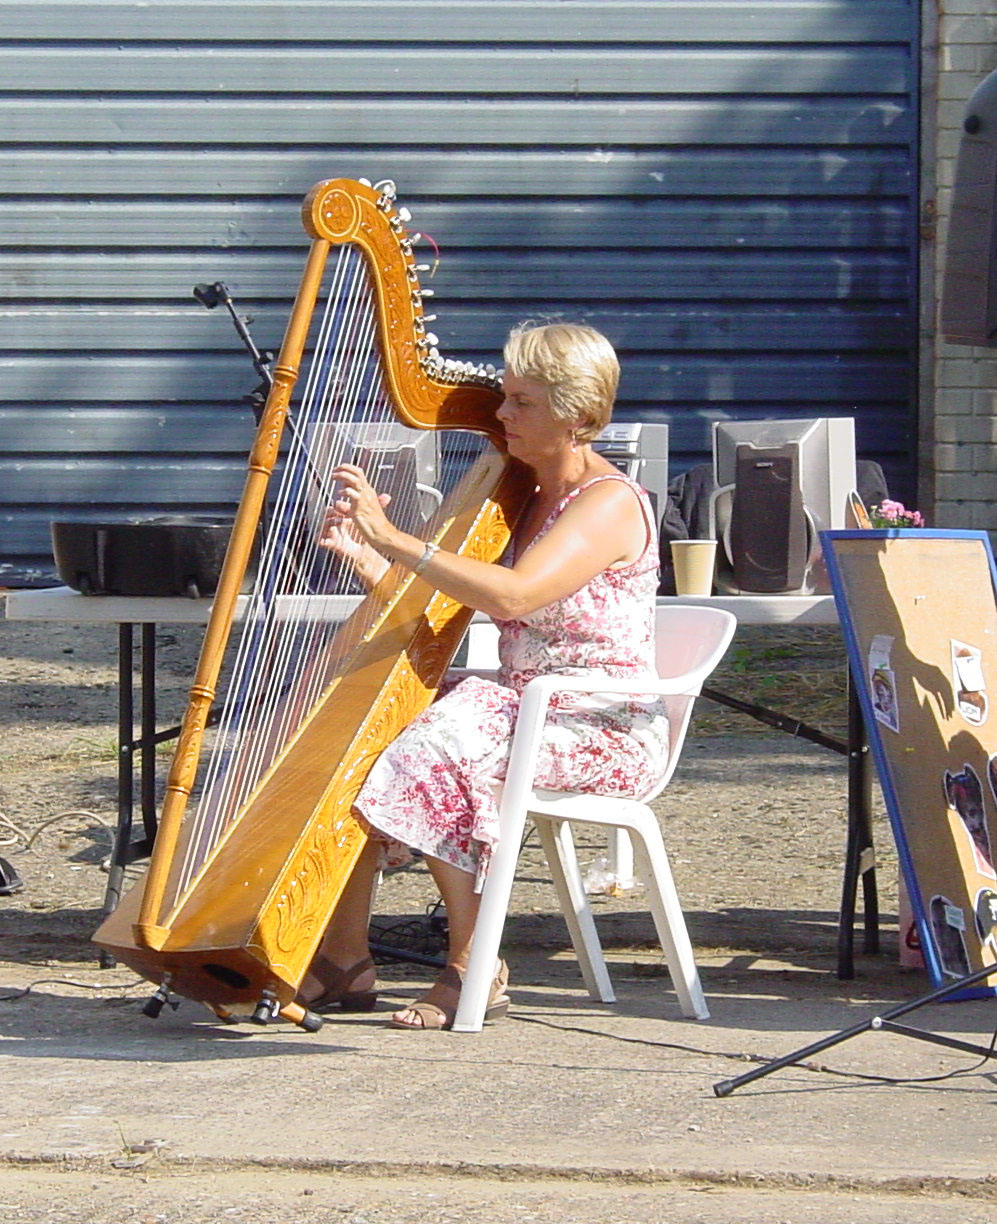 Margaret playing the Parapuayan harp was a perfect end to the day